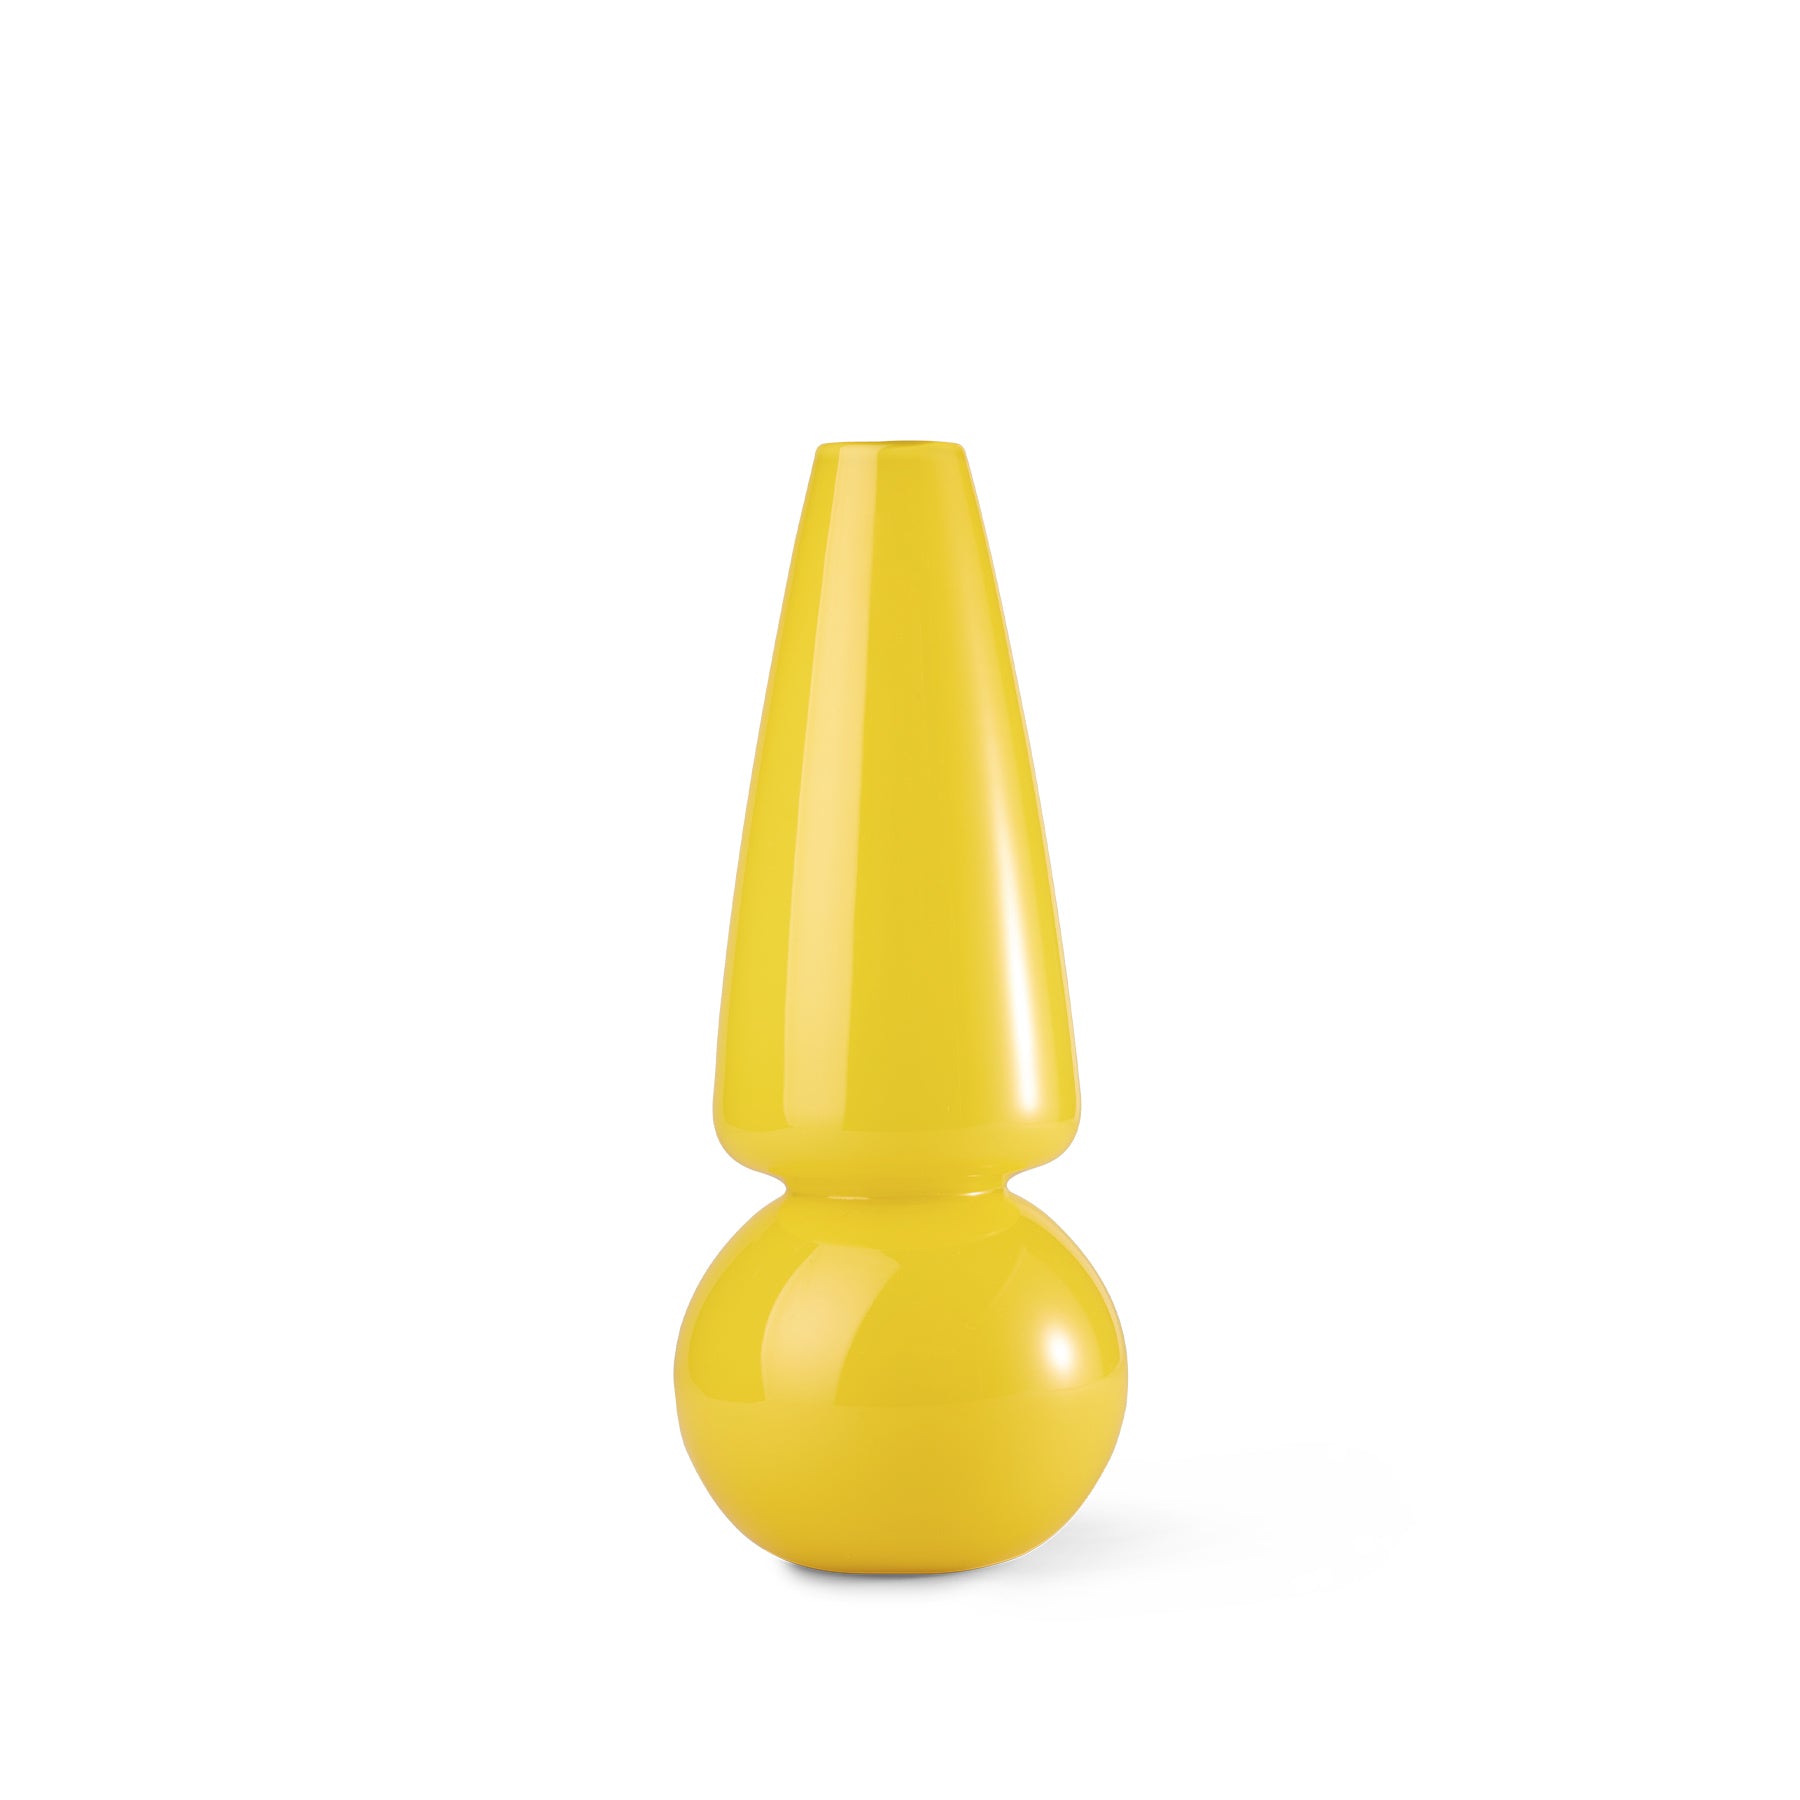 Blomme Cone Vase in Yellow Zoom Image 1